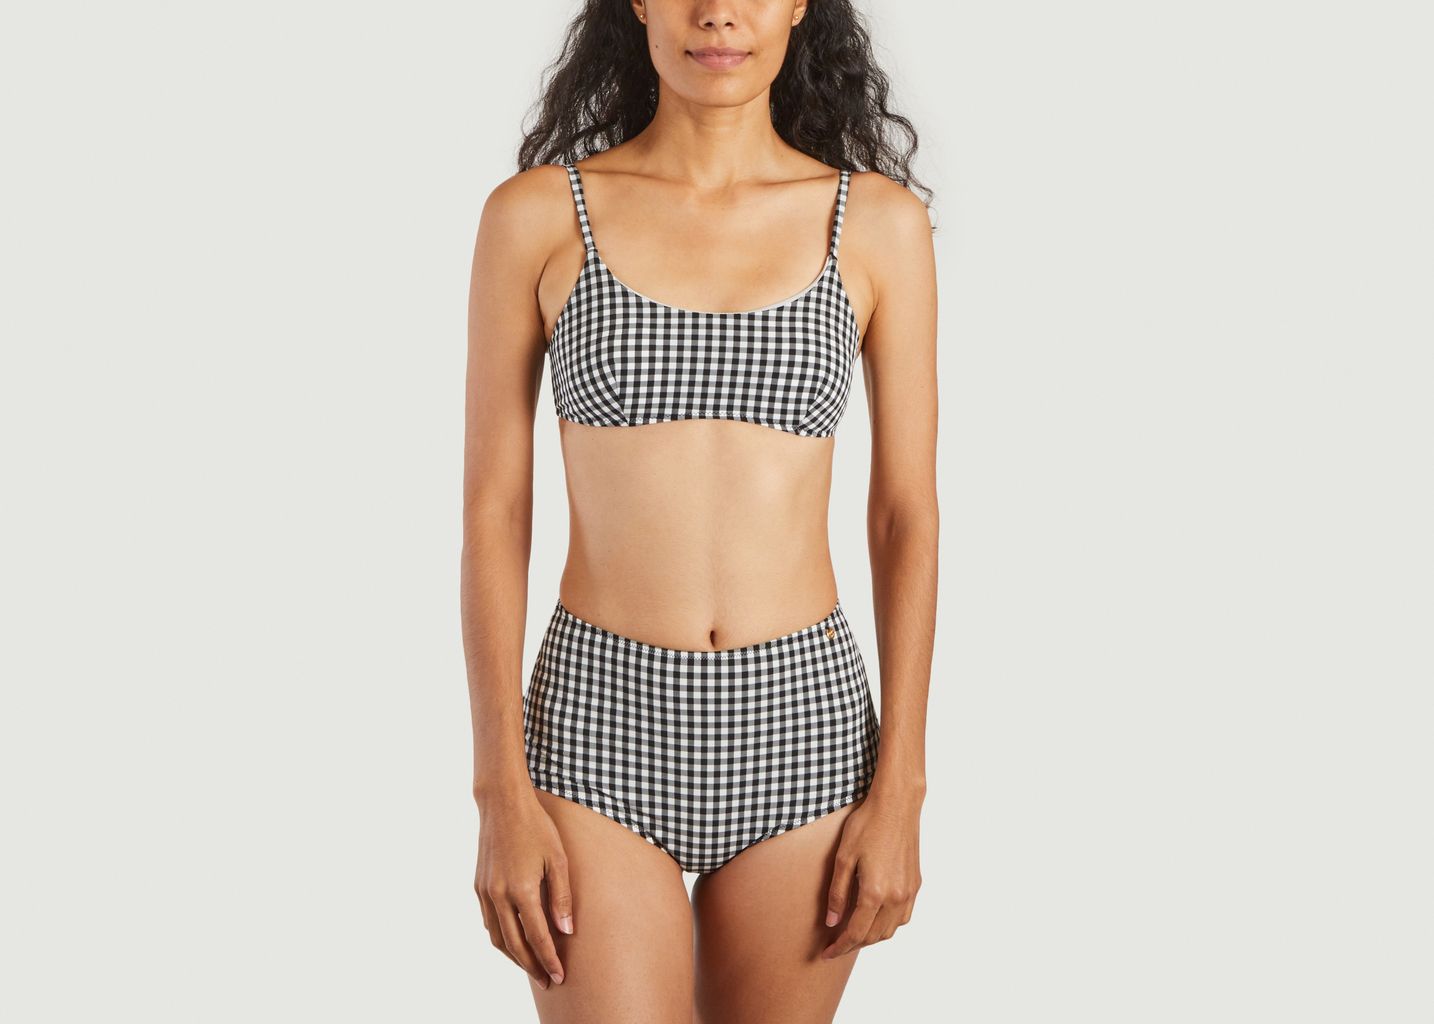 Maillot 2 pièces vichy taille haute - Bohodot